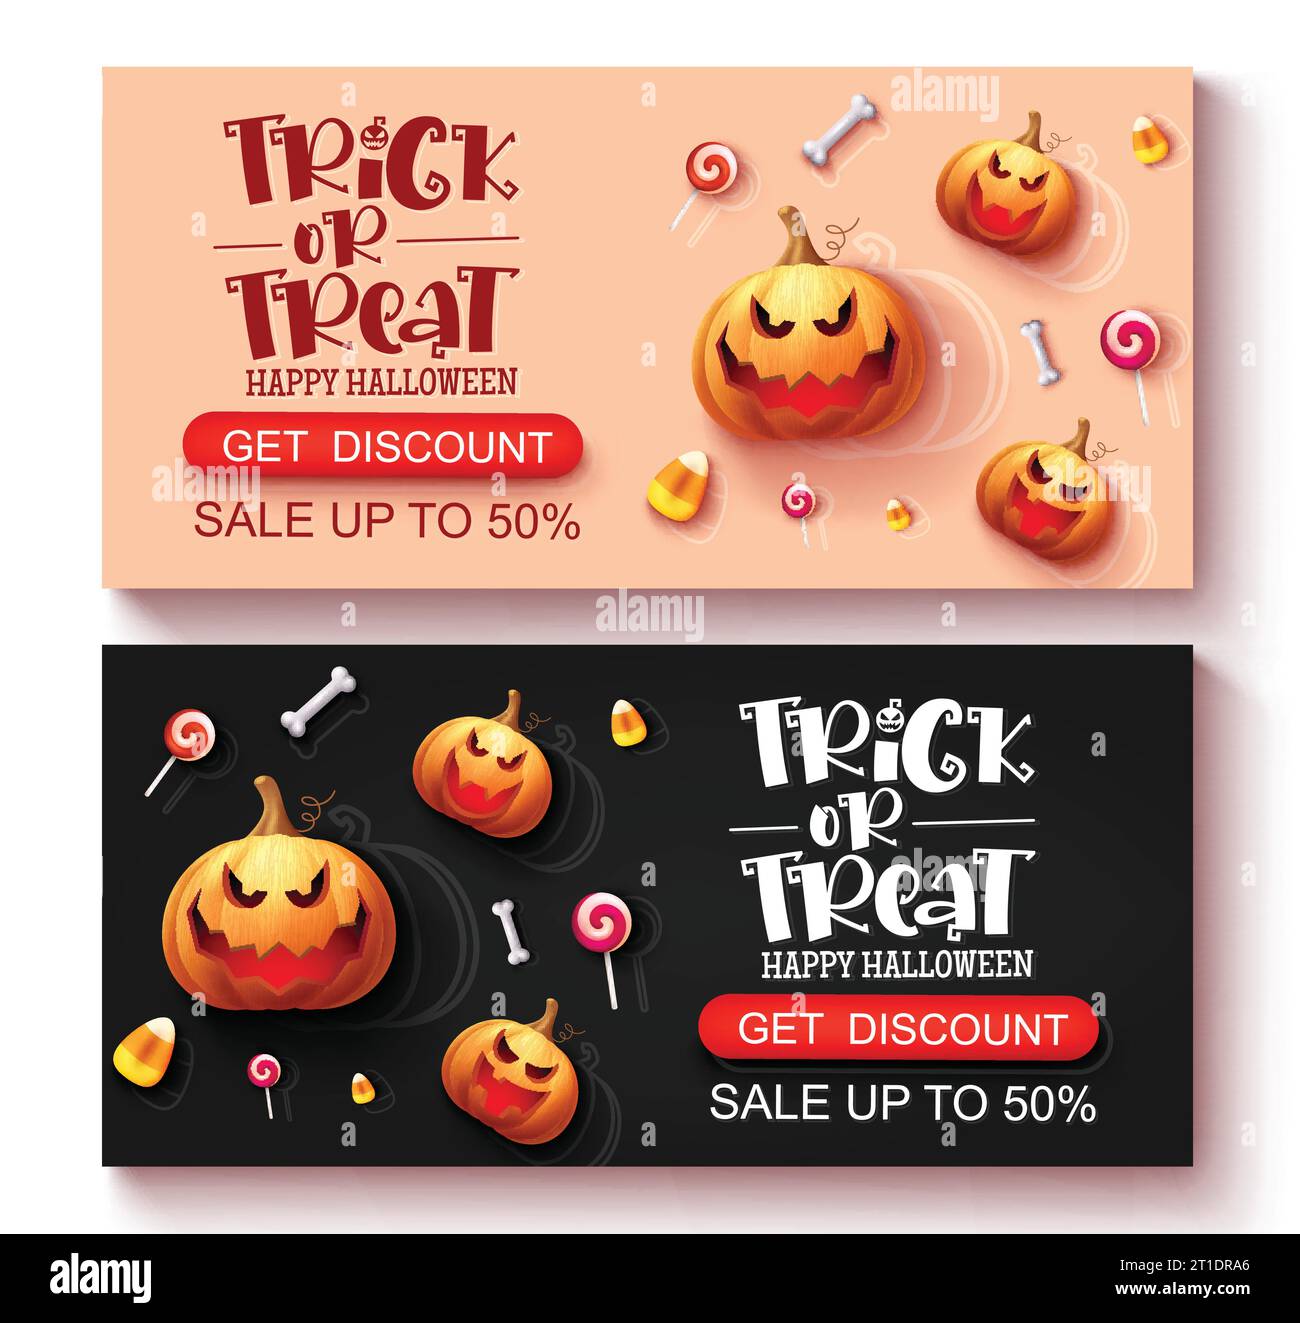 Halloween sale tags vector set banner. Trick or treat halloween invitation discount promo tags for holiday seasonal shopping promotion background. Stock Vector